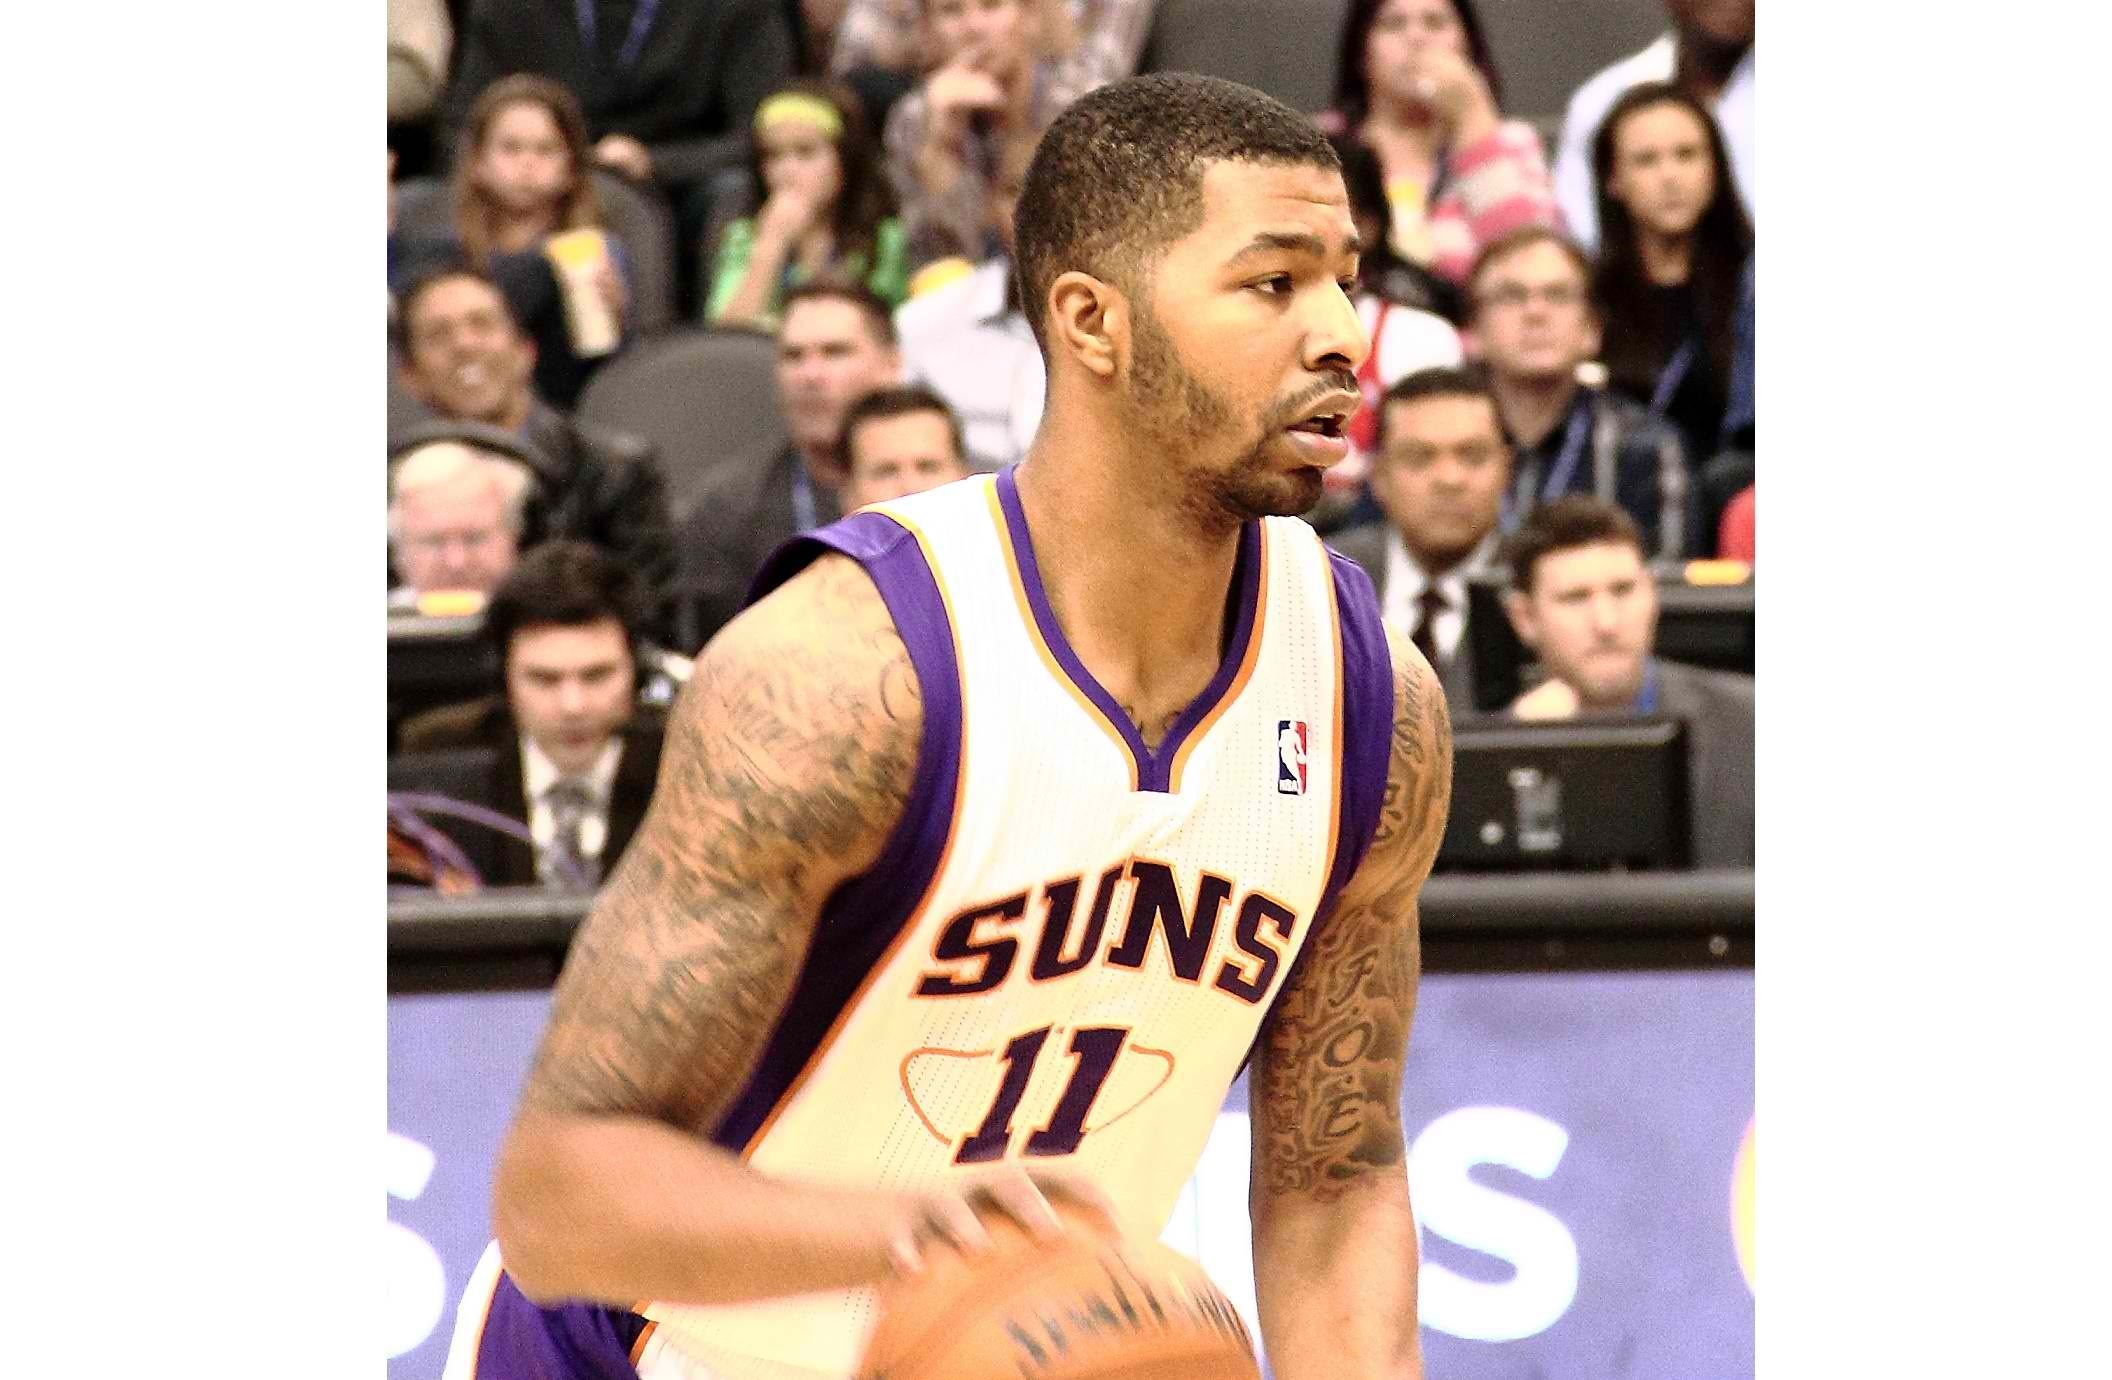 The saga between Markieff Morris and the Phoenix Suns continues and now, new reports suggest that the supposedly degrading relationship between the power forward and his team my lead to a trade off before the next season. The Phoenix Suns might be looking to trade Markieff Morris for the New York Knicks’ Carmelo Anthony.